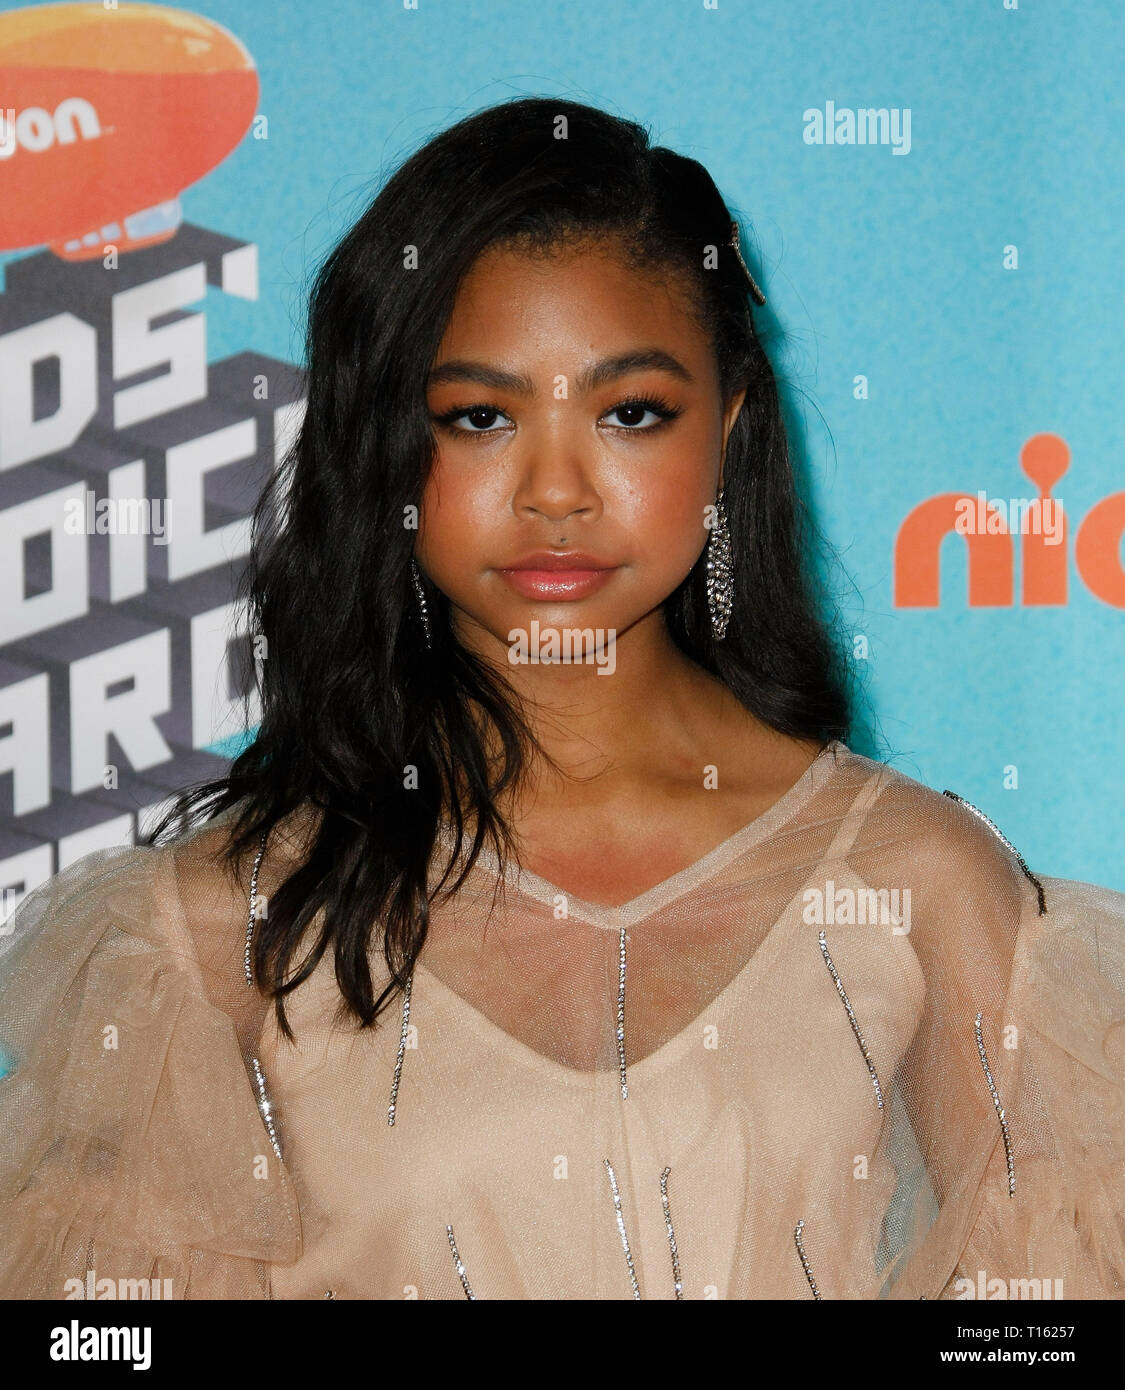 Los Angeles, USA. 23rd Mar, 2019. Navia Robinson attends Nickelodeon's 2019 Kids' Choice Awards at Galen Center on March 23, 2019 in Los Angeles, California. Photo: imageSPACE Credit: Imagespace/Alamy Live News Stock Photo